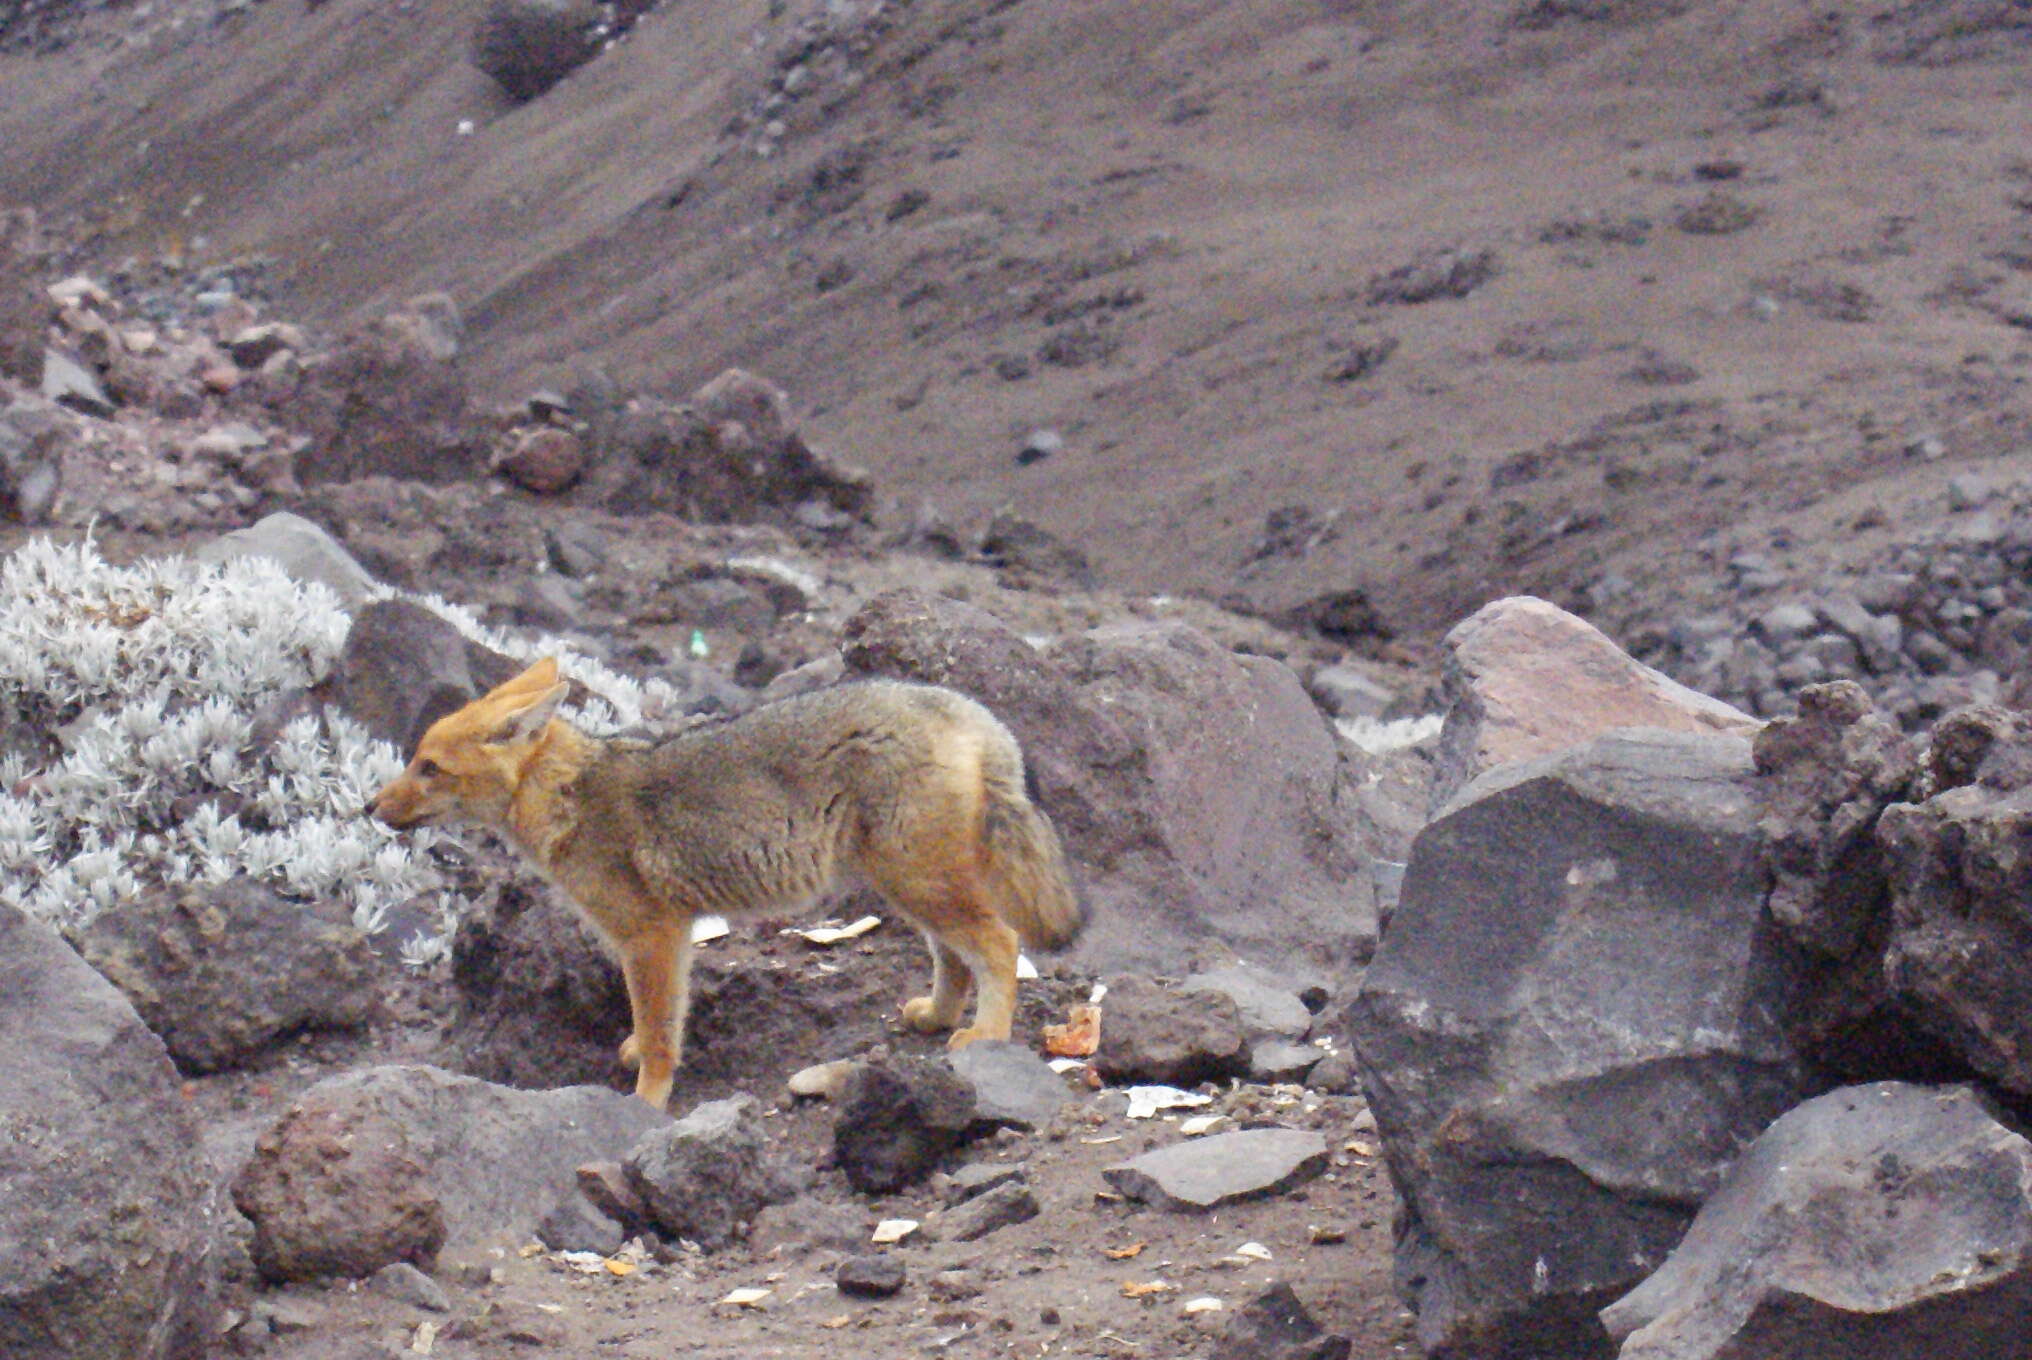 Image of South American fox